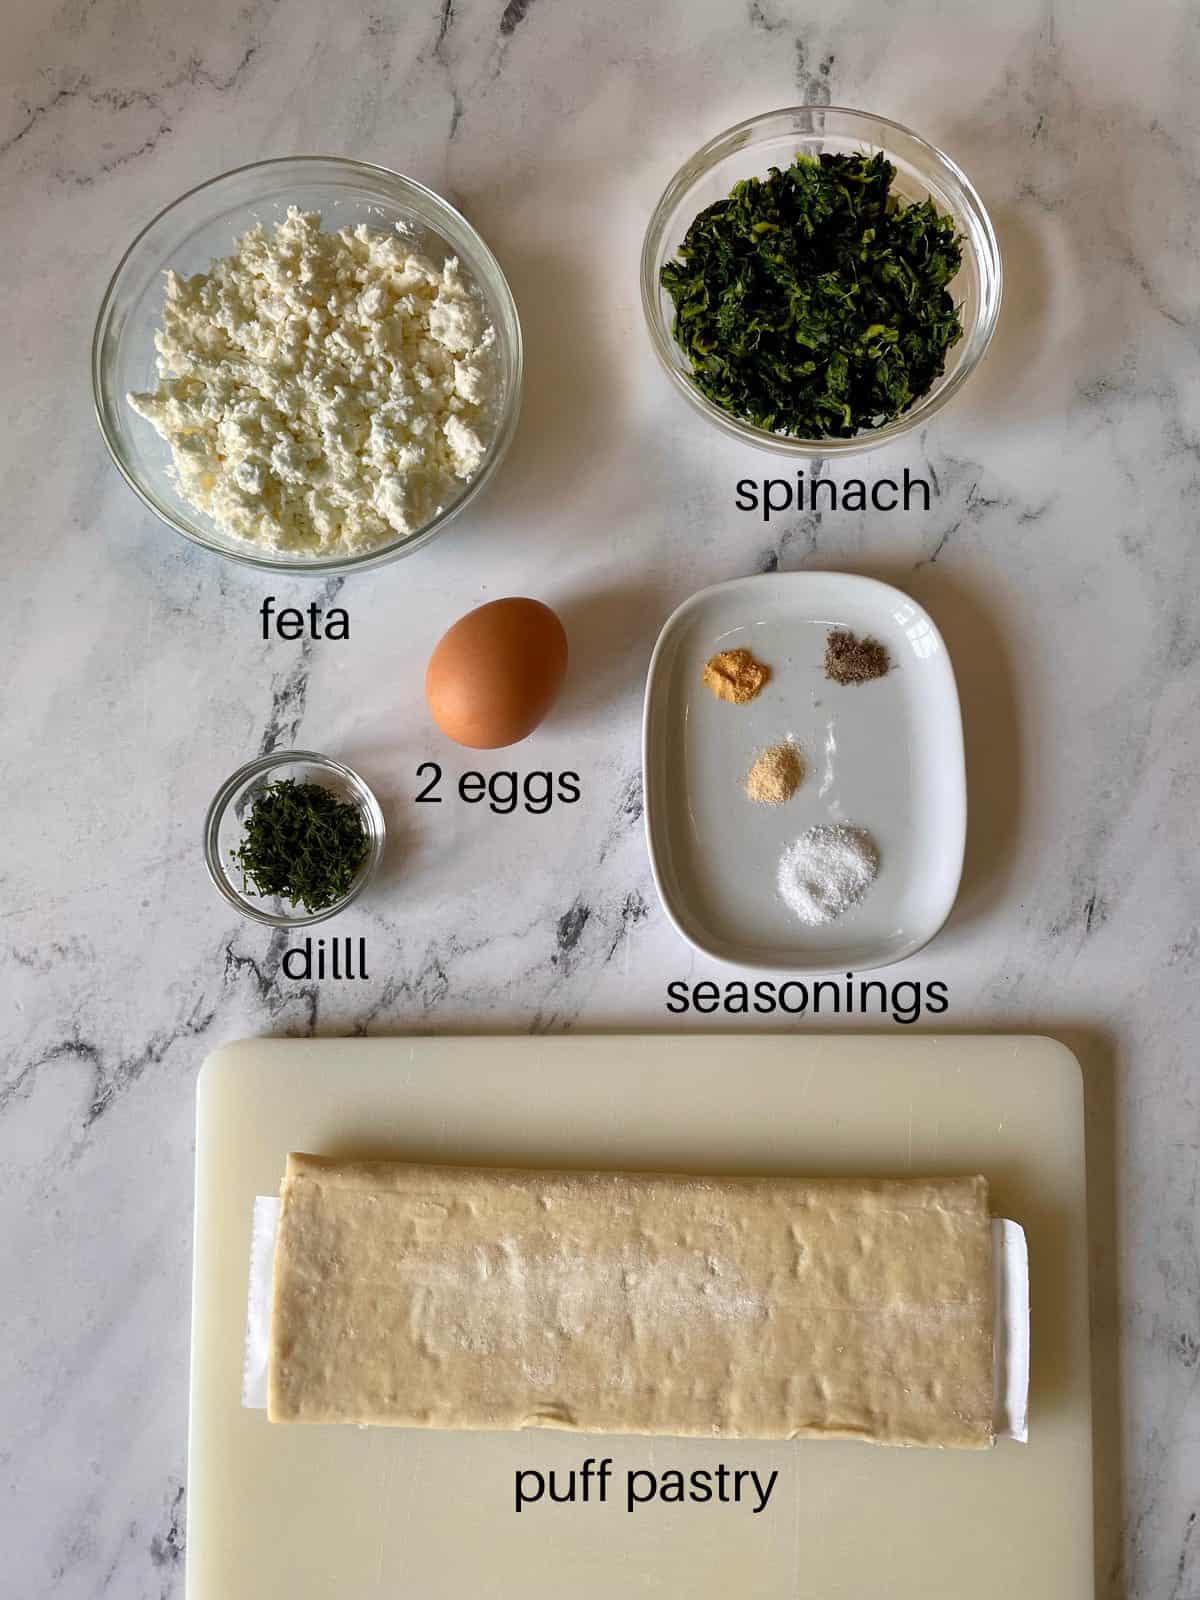 Ingredients needed to make spinach and feta bourekas.